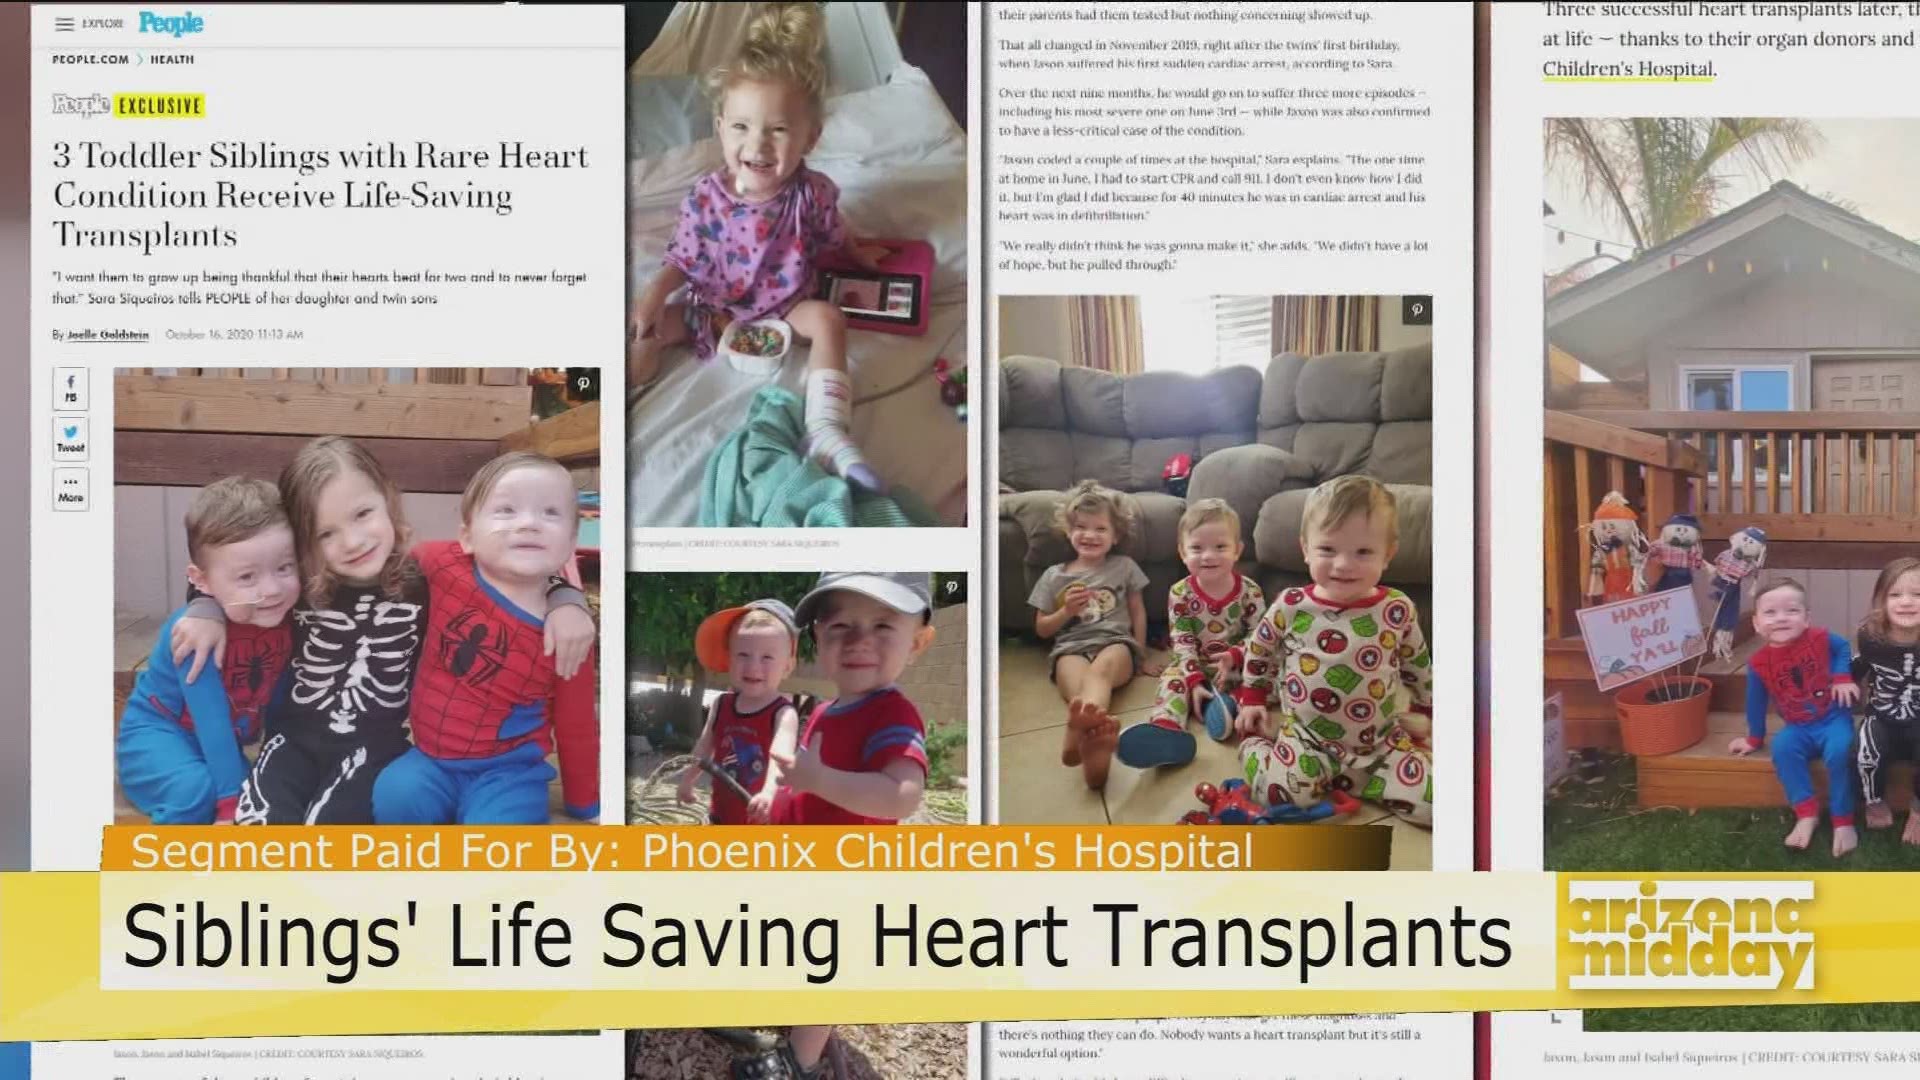 Siqueiros Family shares how their three children underwent heart transplants and how the Phoenix Children's Hospital Heart Center helped make this possible